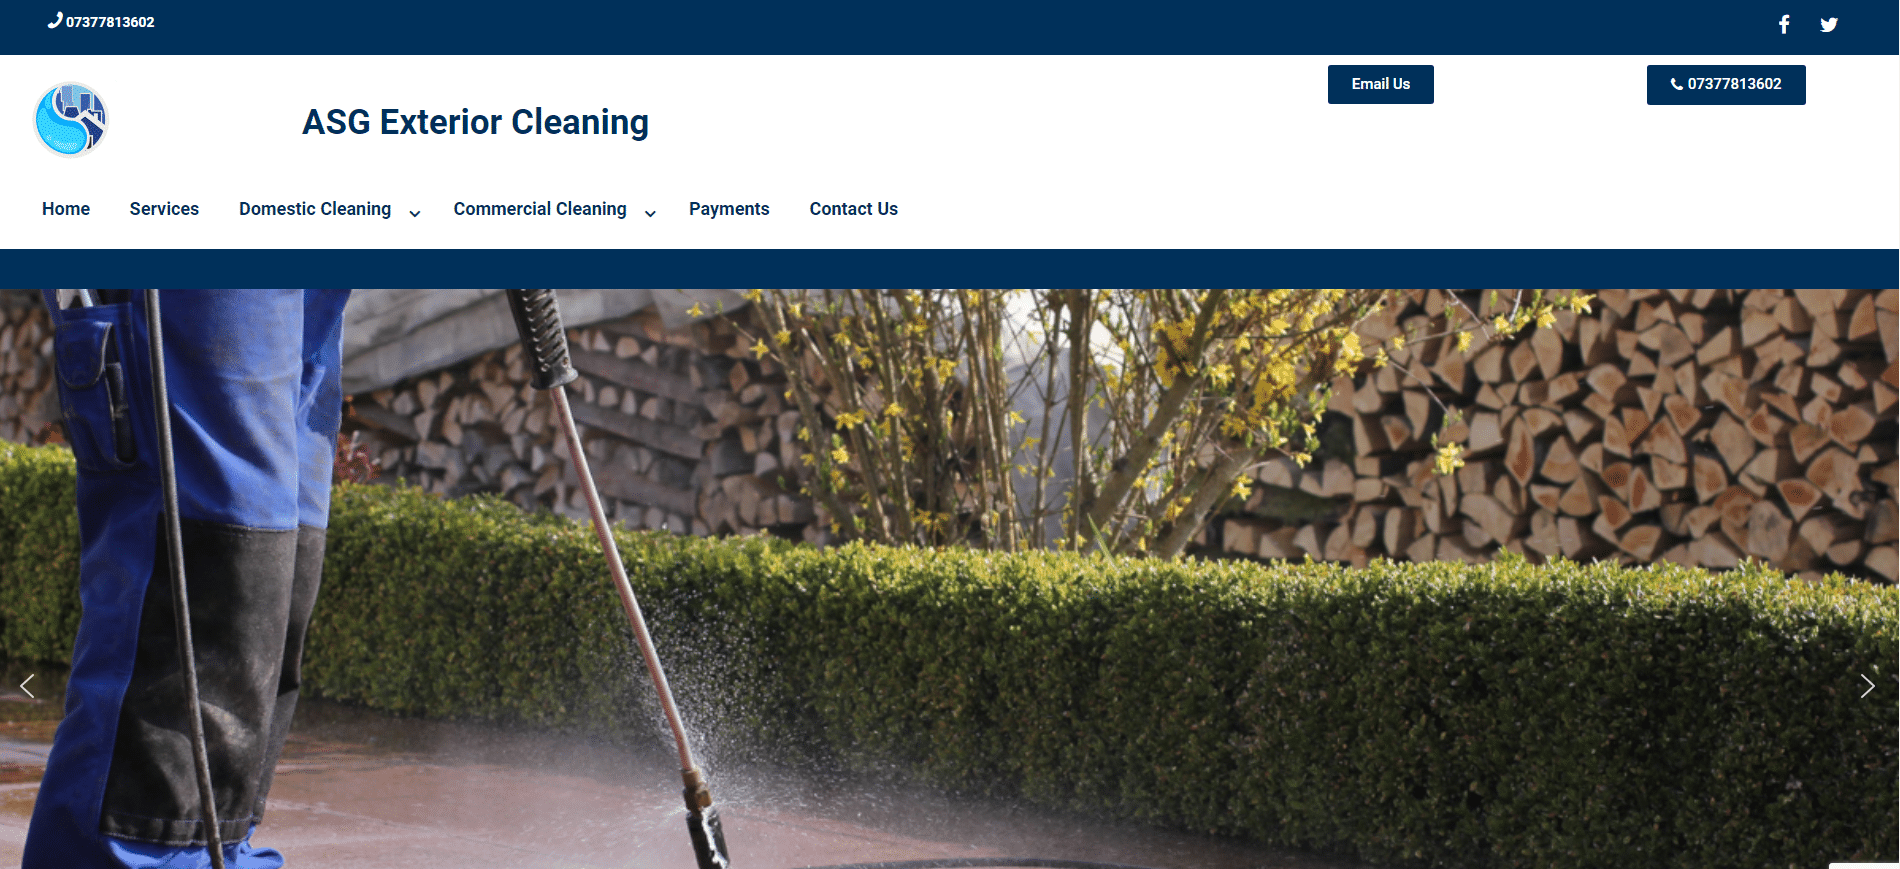 Cleaning Company Website Design